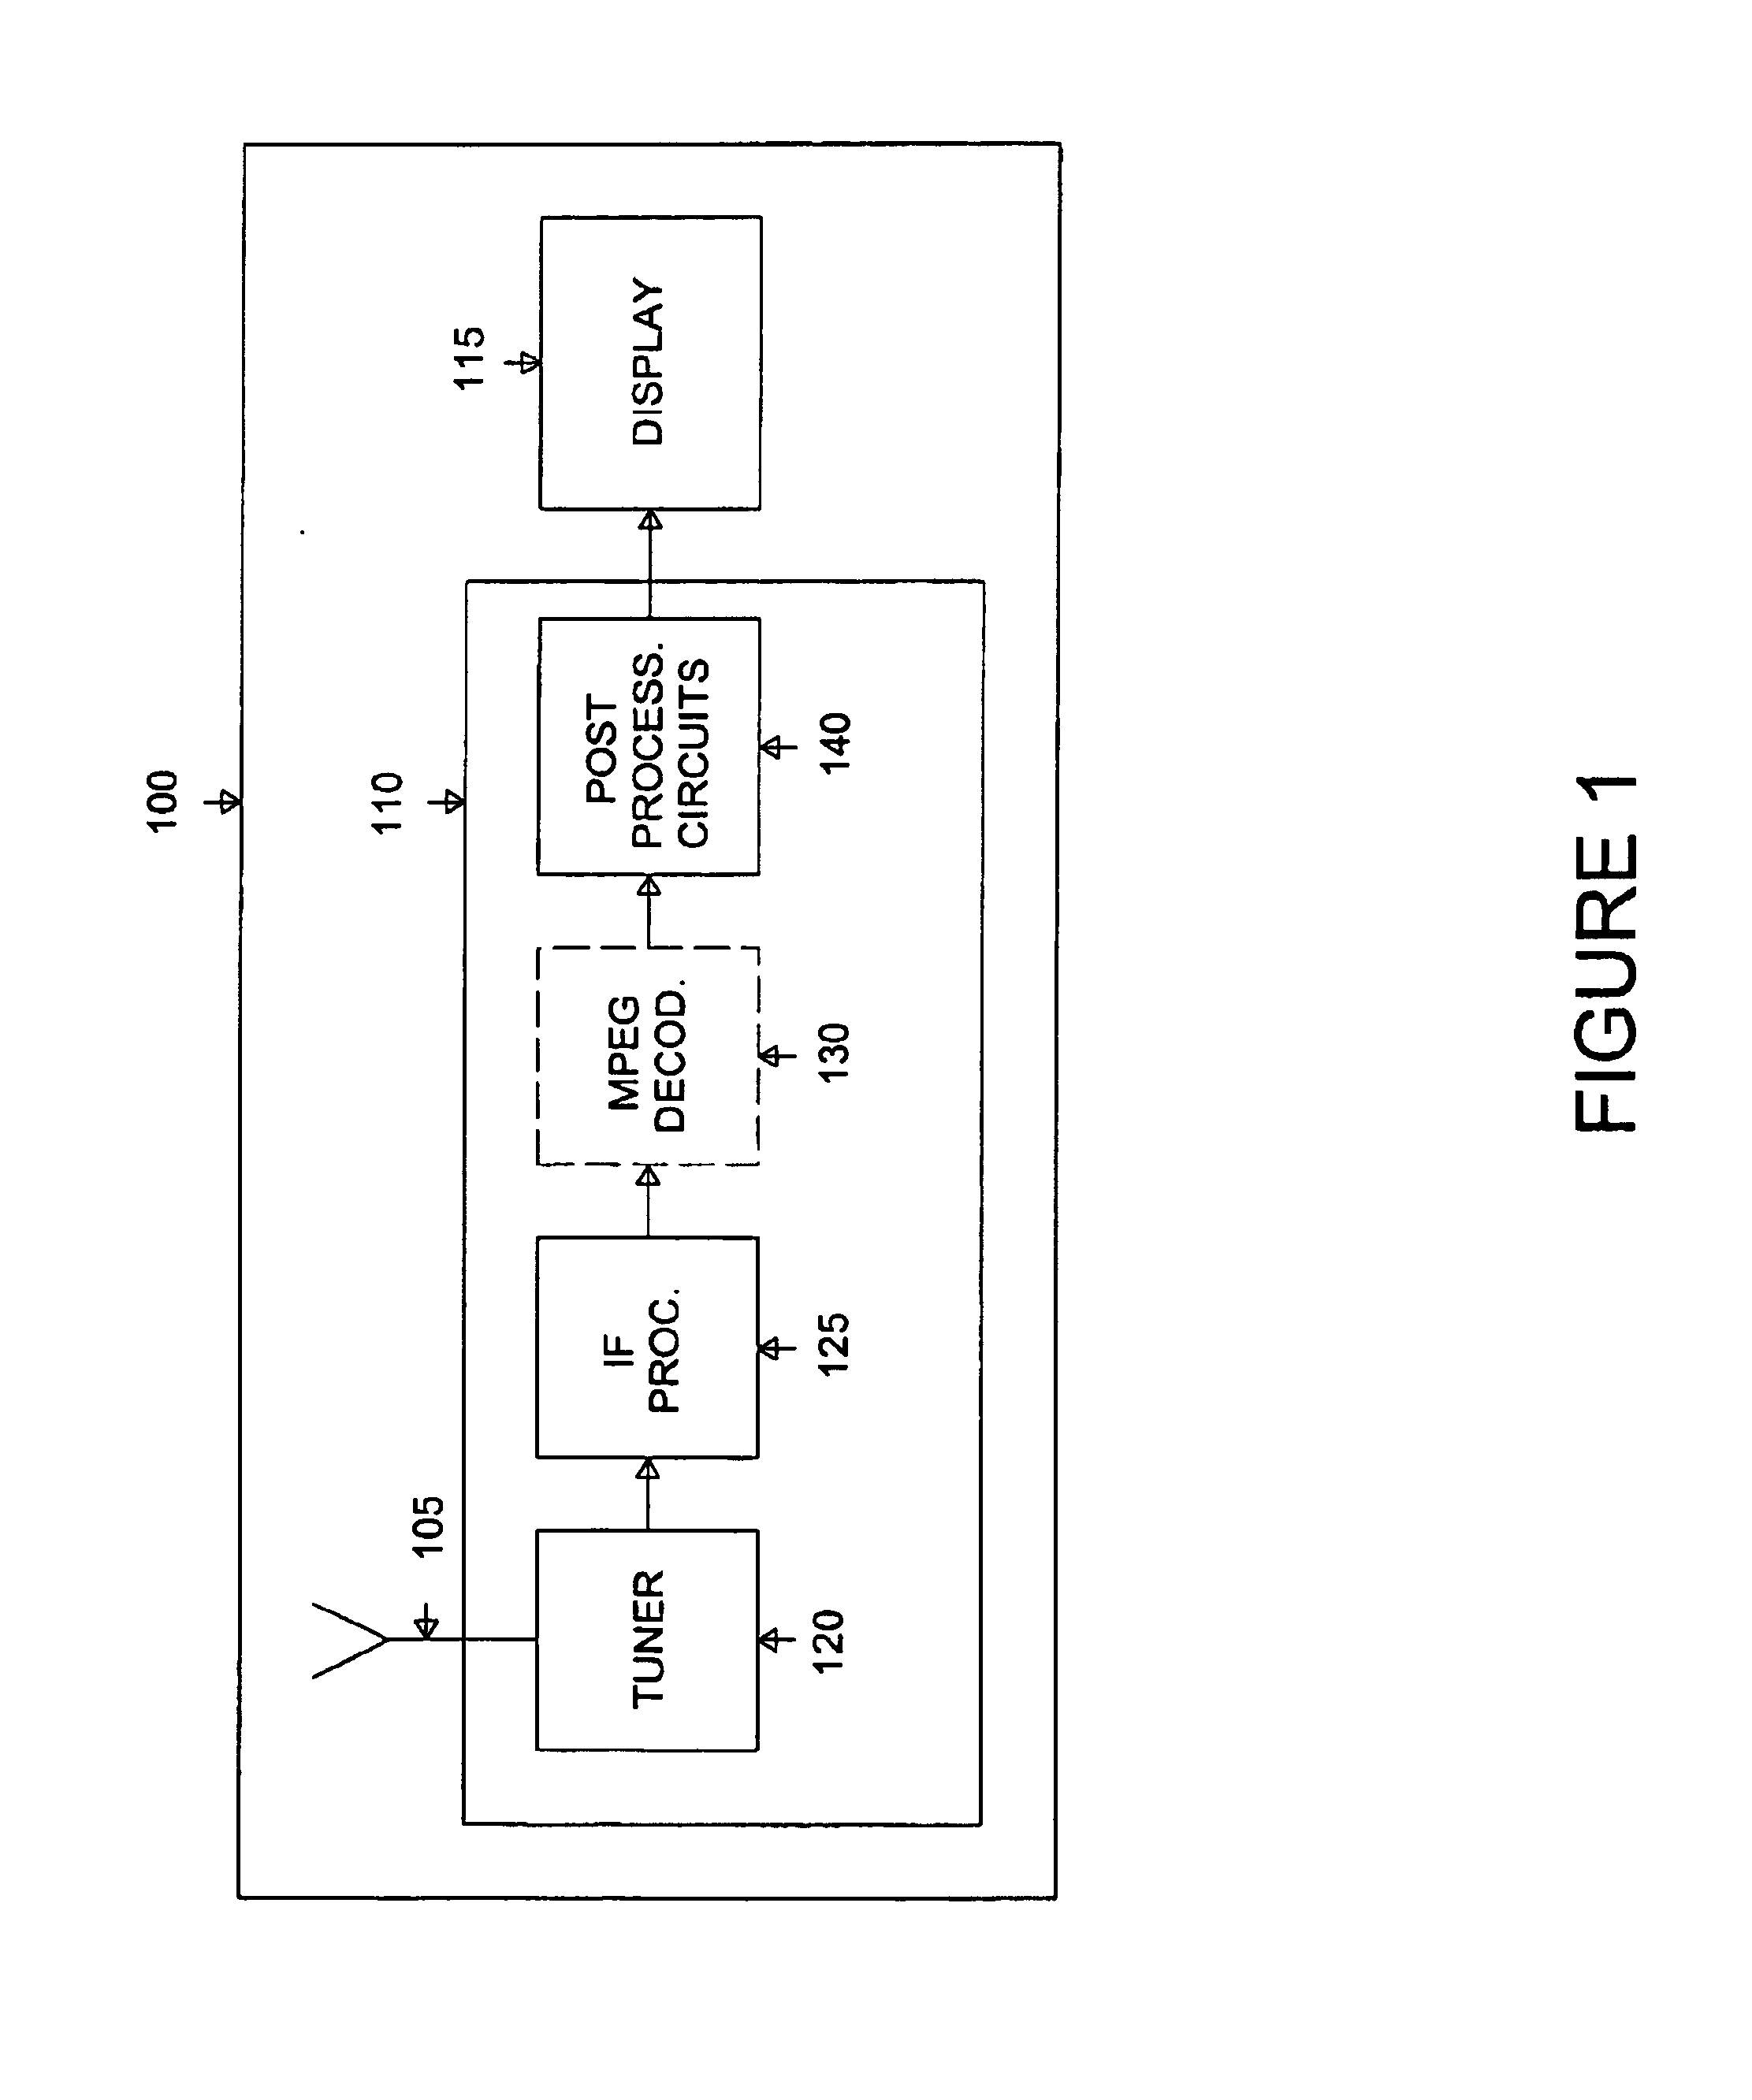 System and method for performing segmentation-based enhancements of a video image